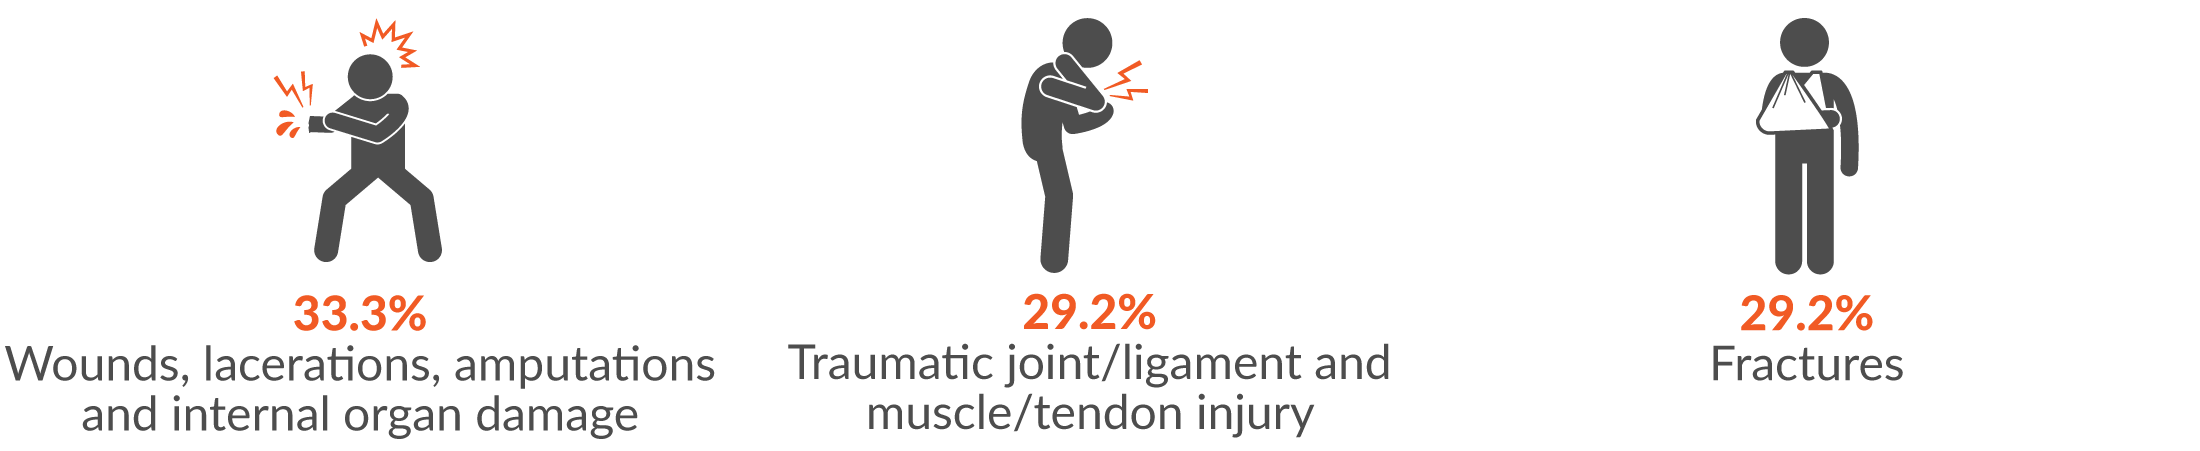 33.3% wounds, lacerations, amputations and internal organ damage; 29.2% traumatic joint/ligament and muscle/tendon injury; and 29.2% fractures.